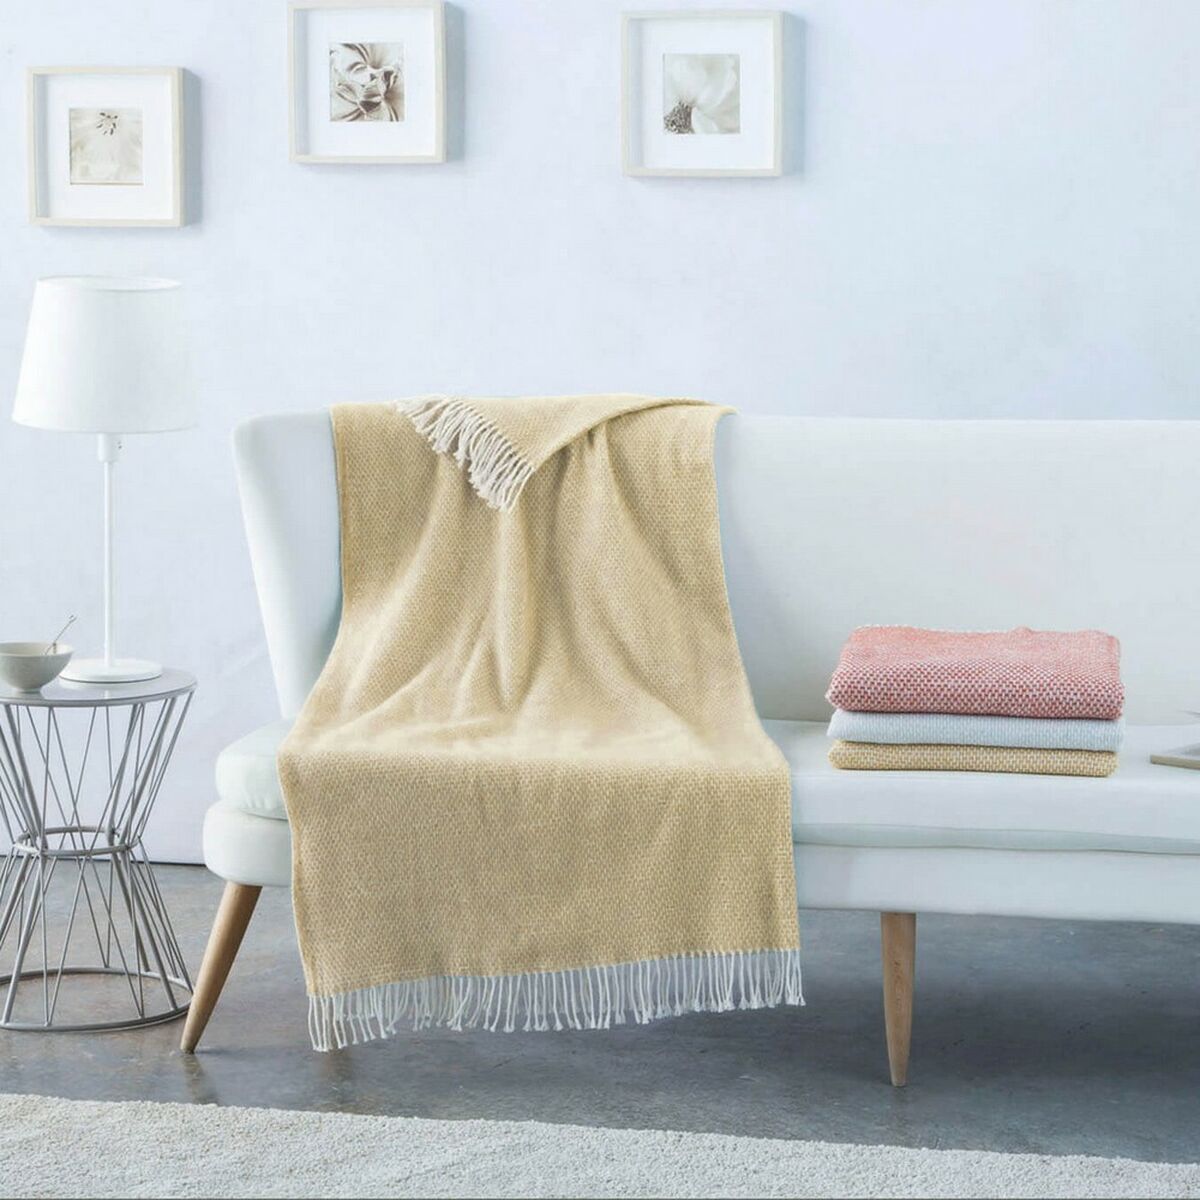 Ocre Blanket (130 x 170 cm)